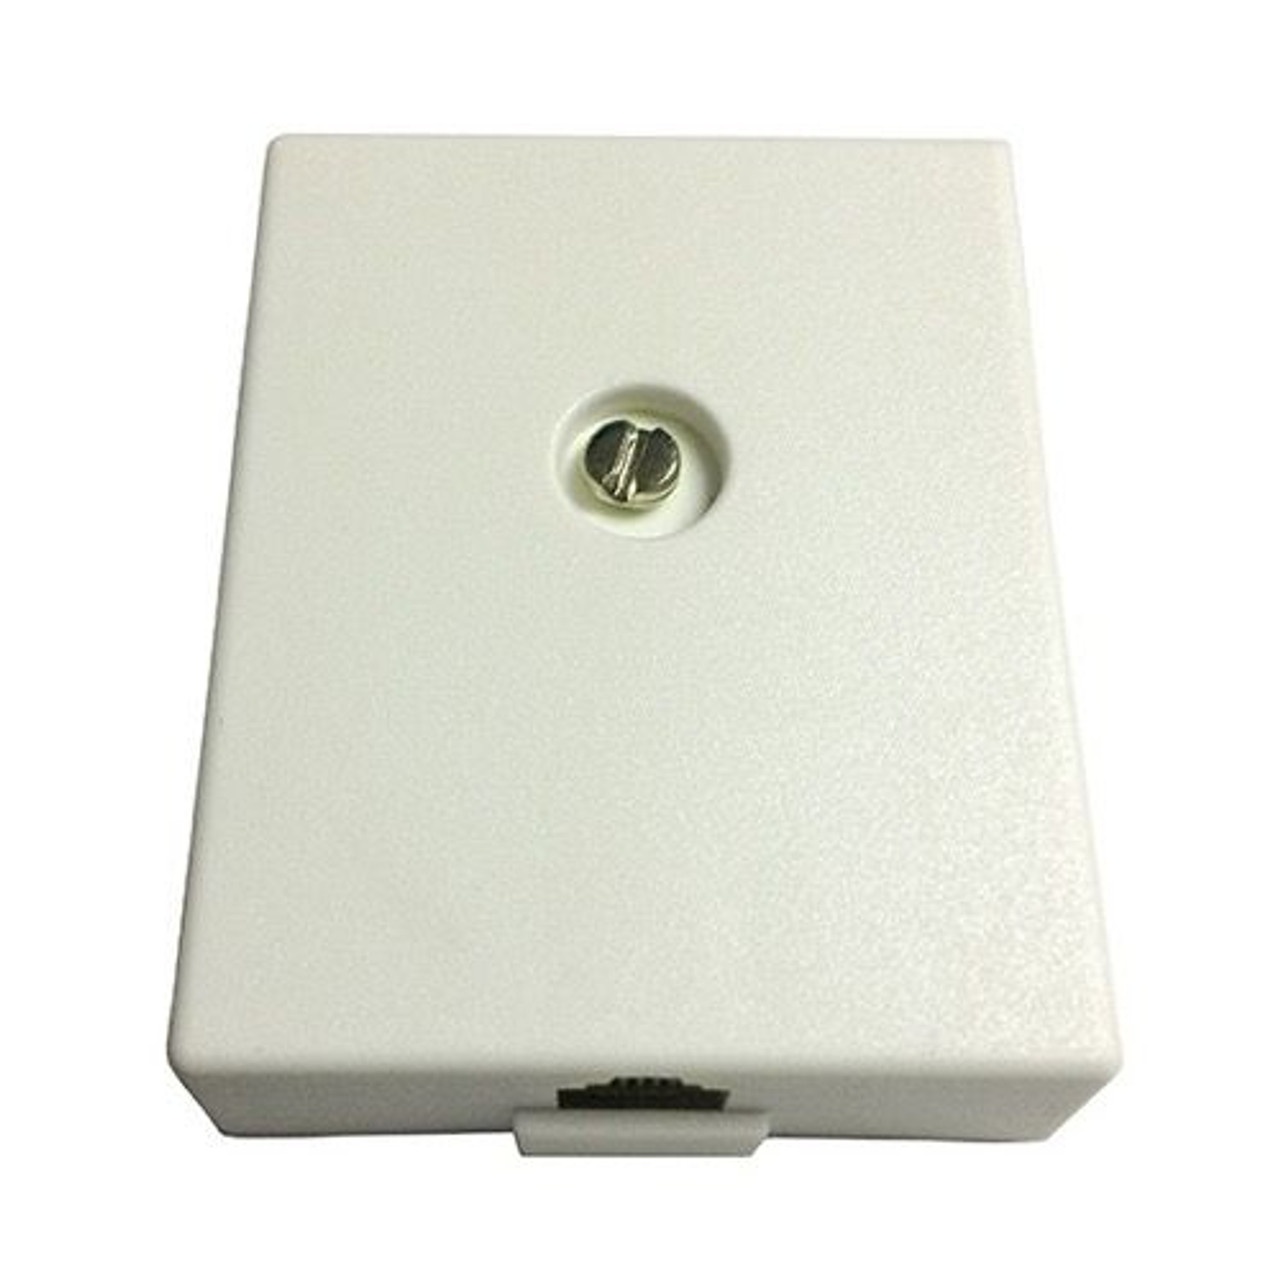 Leviton c0255w Surface Mount Telephone Jack Modular White  6P4C RJ11 Surface Mount Wall Telephone Box 4 Wire Conductor Line, Junction Block Cover